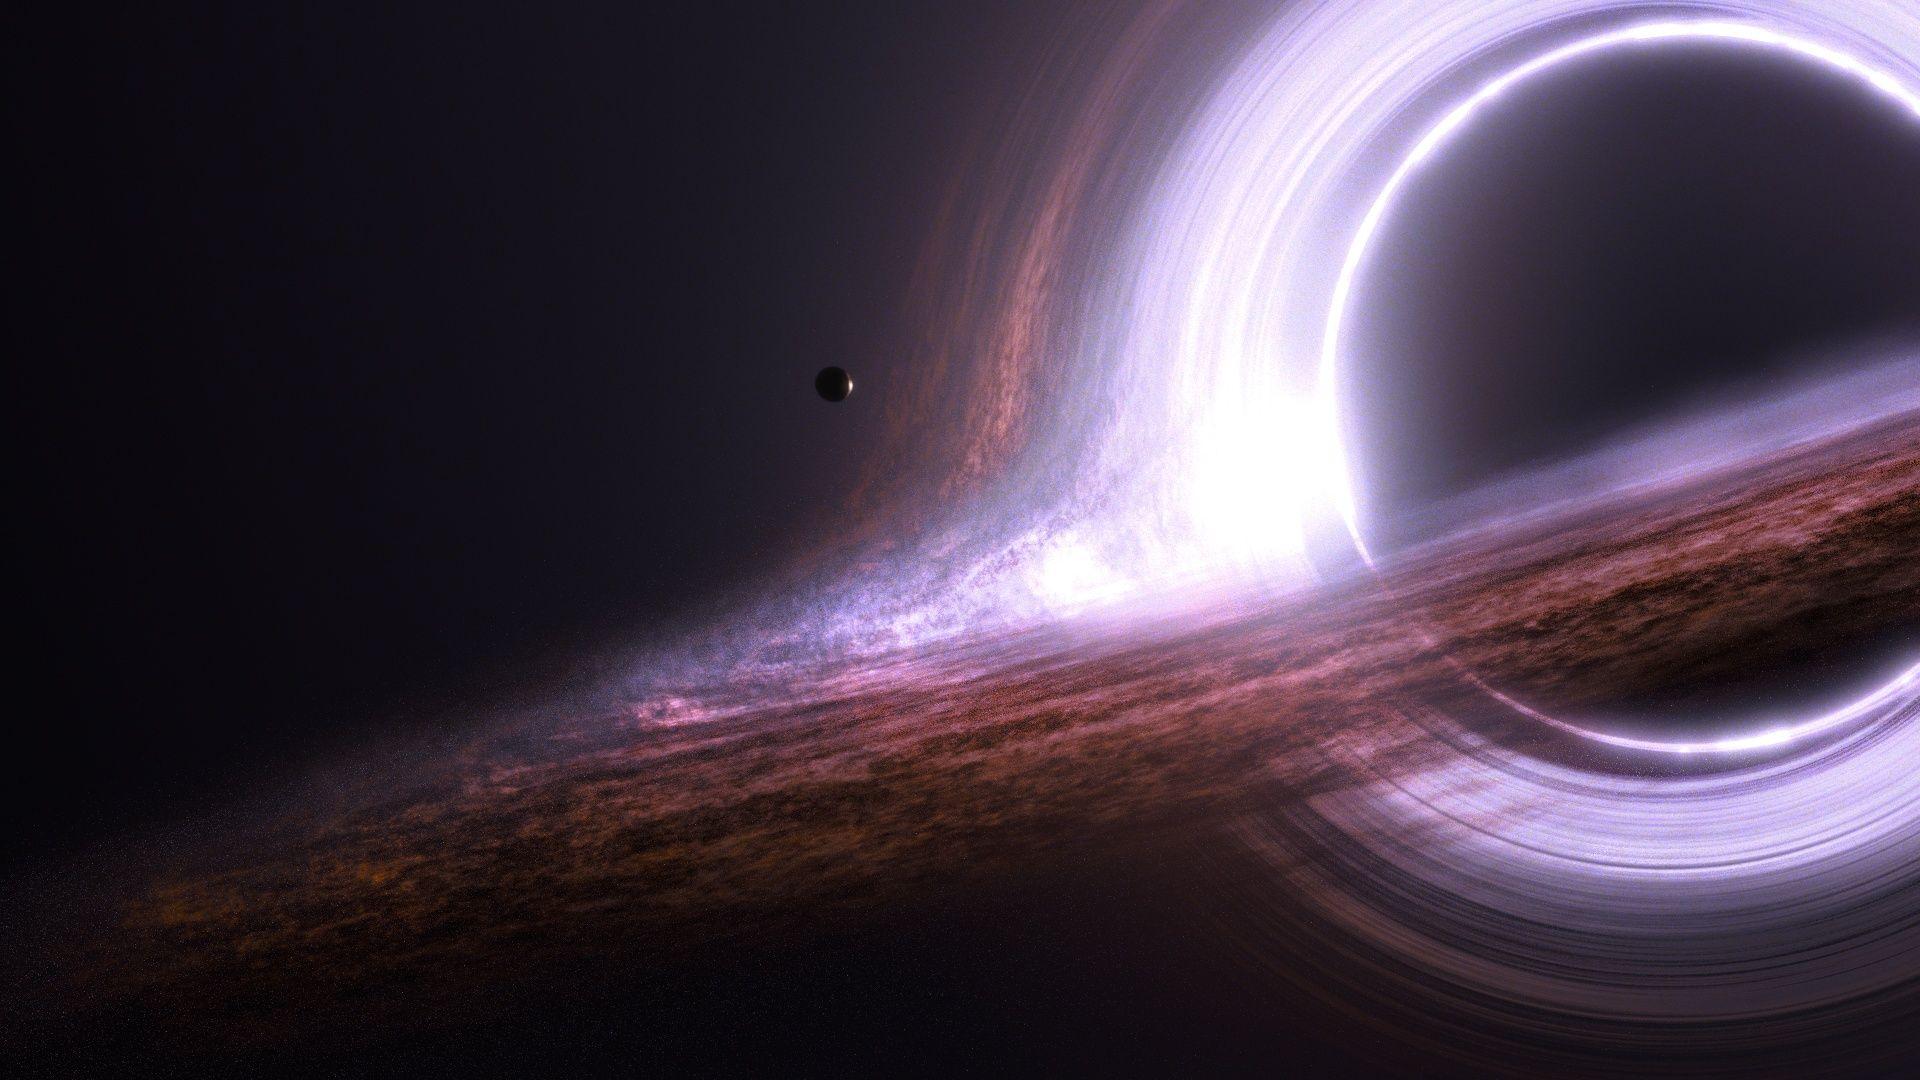 Black Hole Wallpapers Hd | Black hole wallpaper, Space art, Black holes in  space